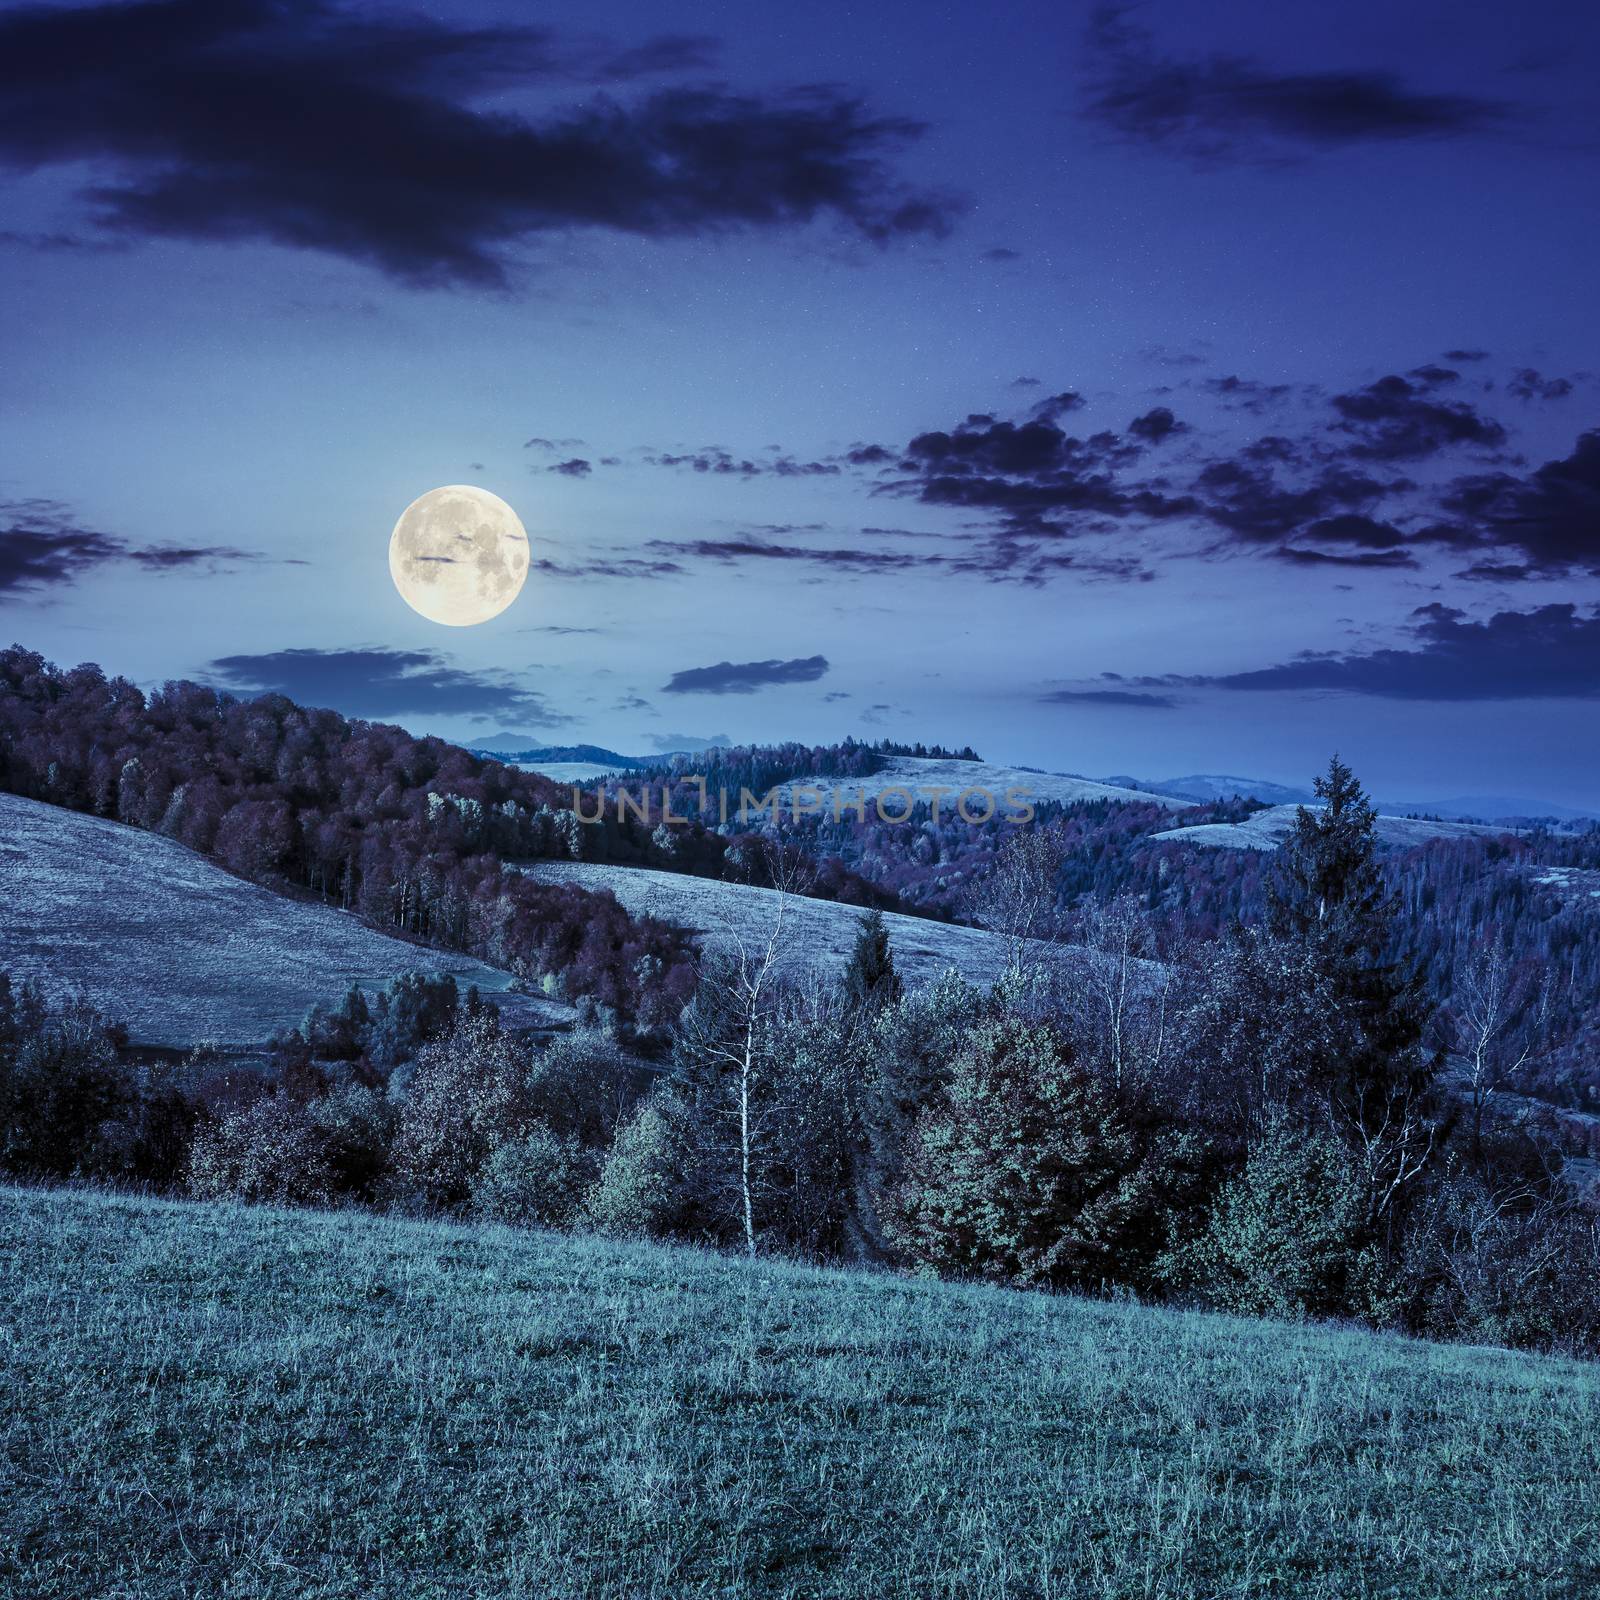 slope of mountain range with pine trees and meadow at night in full moon light